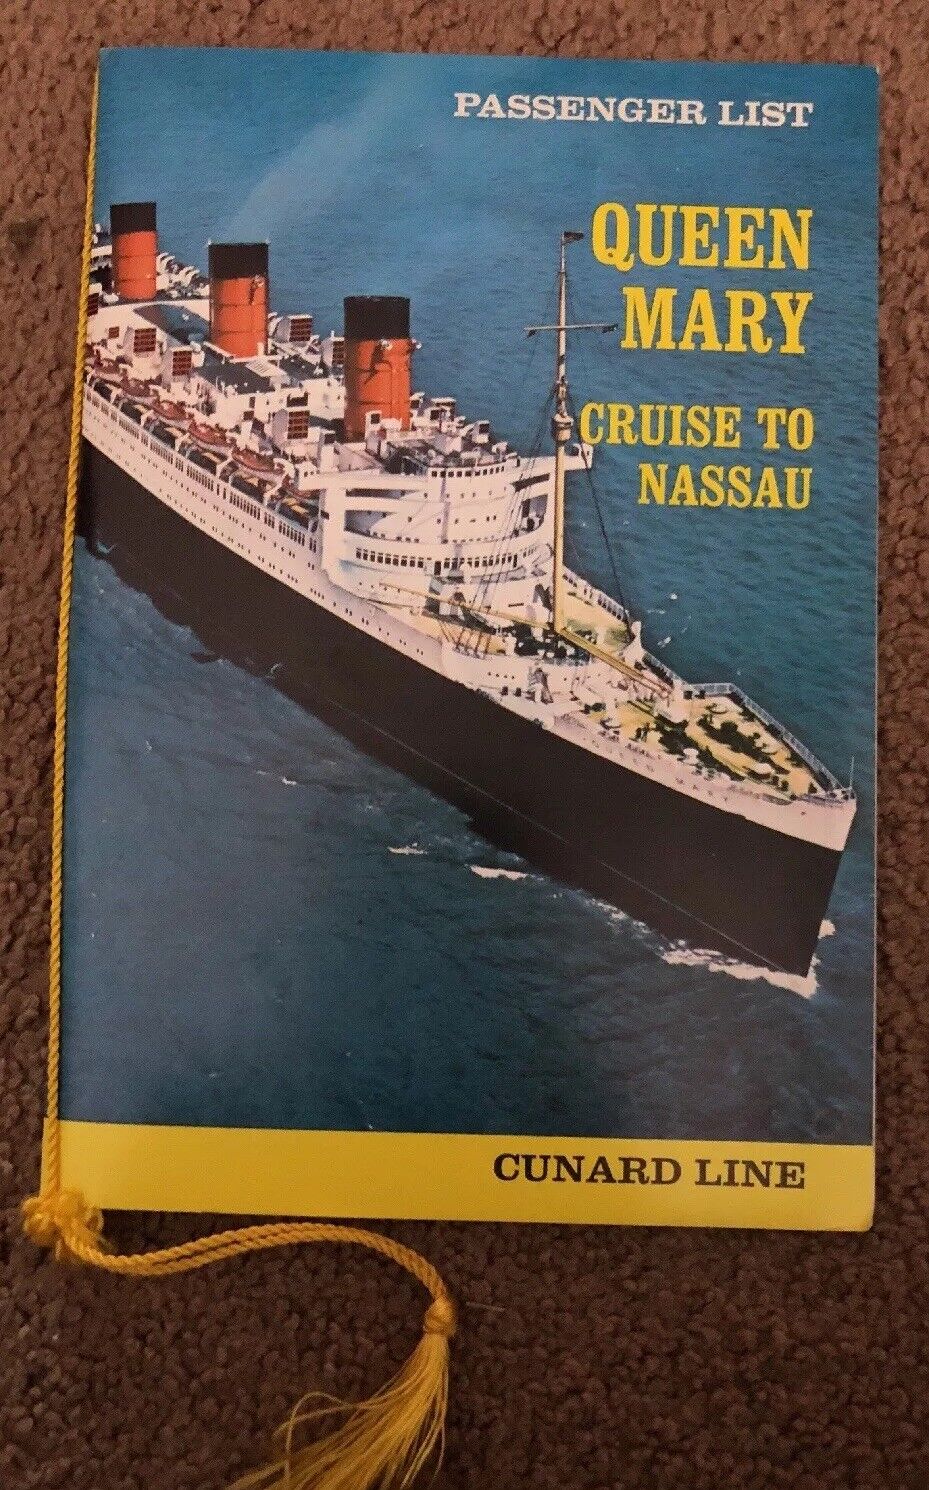 RMS Queen Mary Feb 18 1966 Passenger List Cruise to Nassau